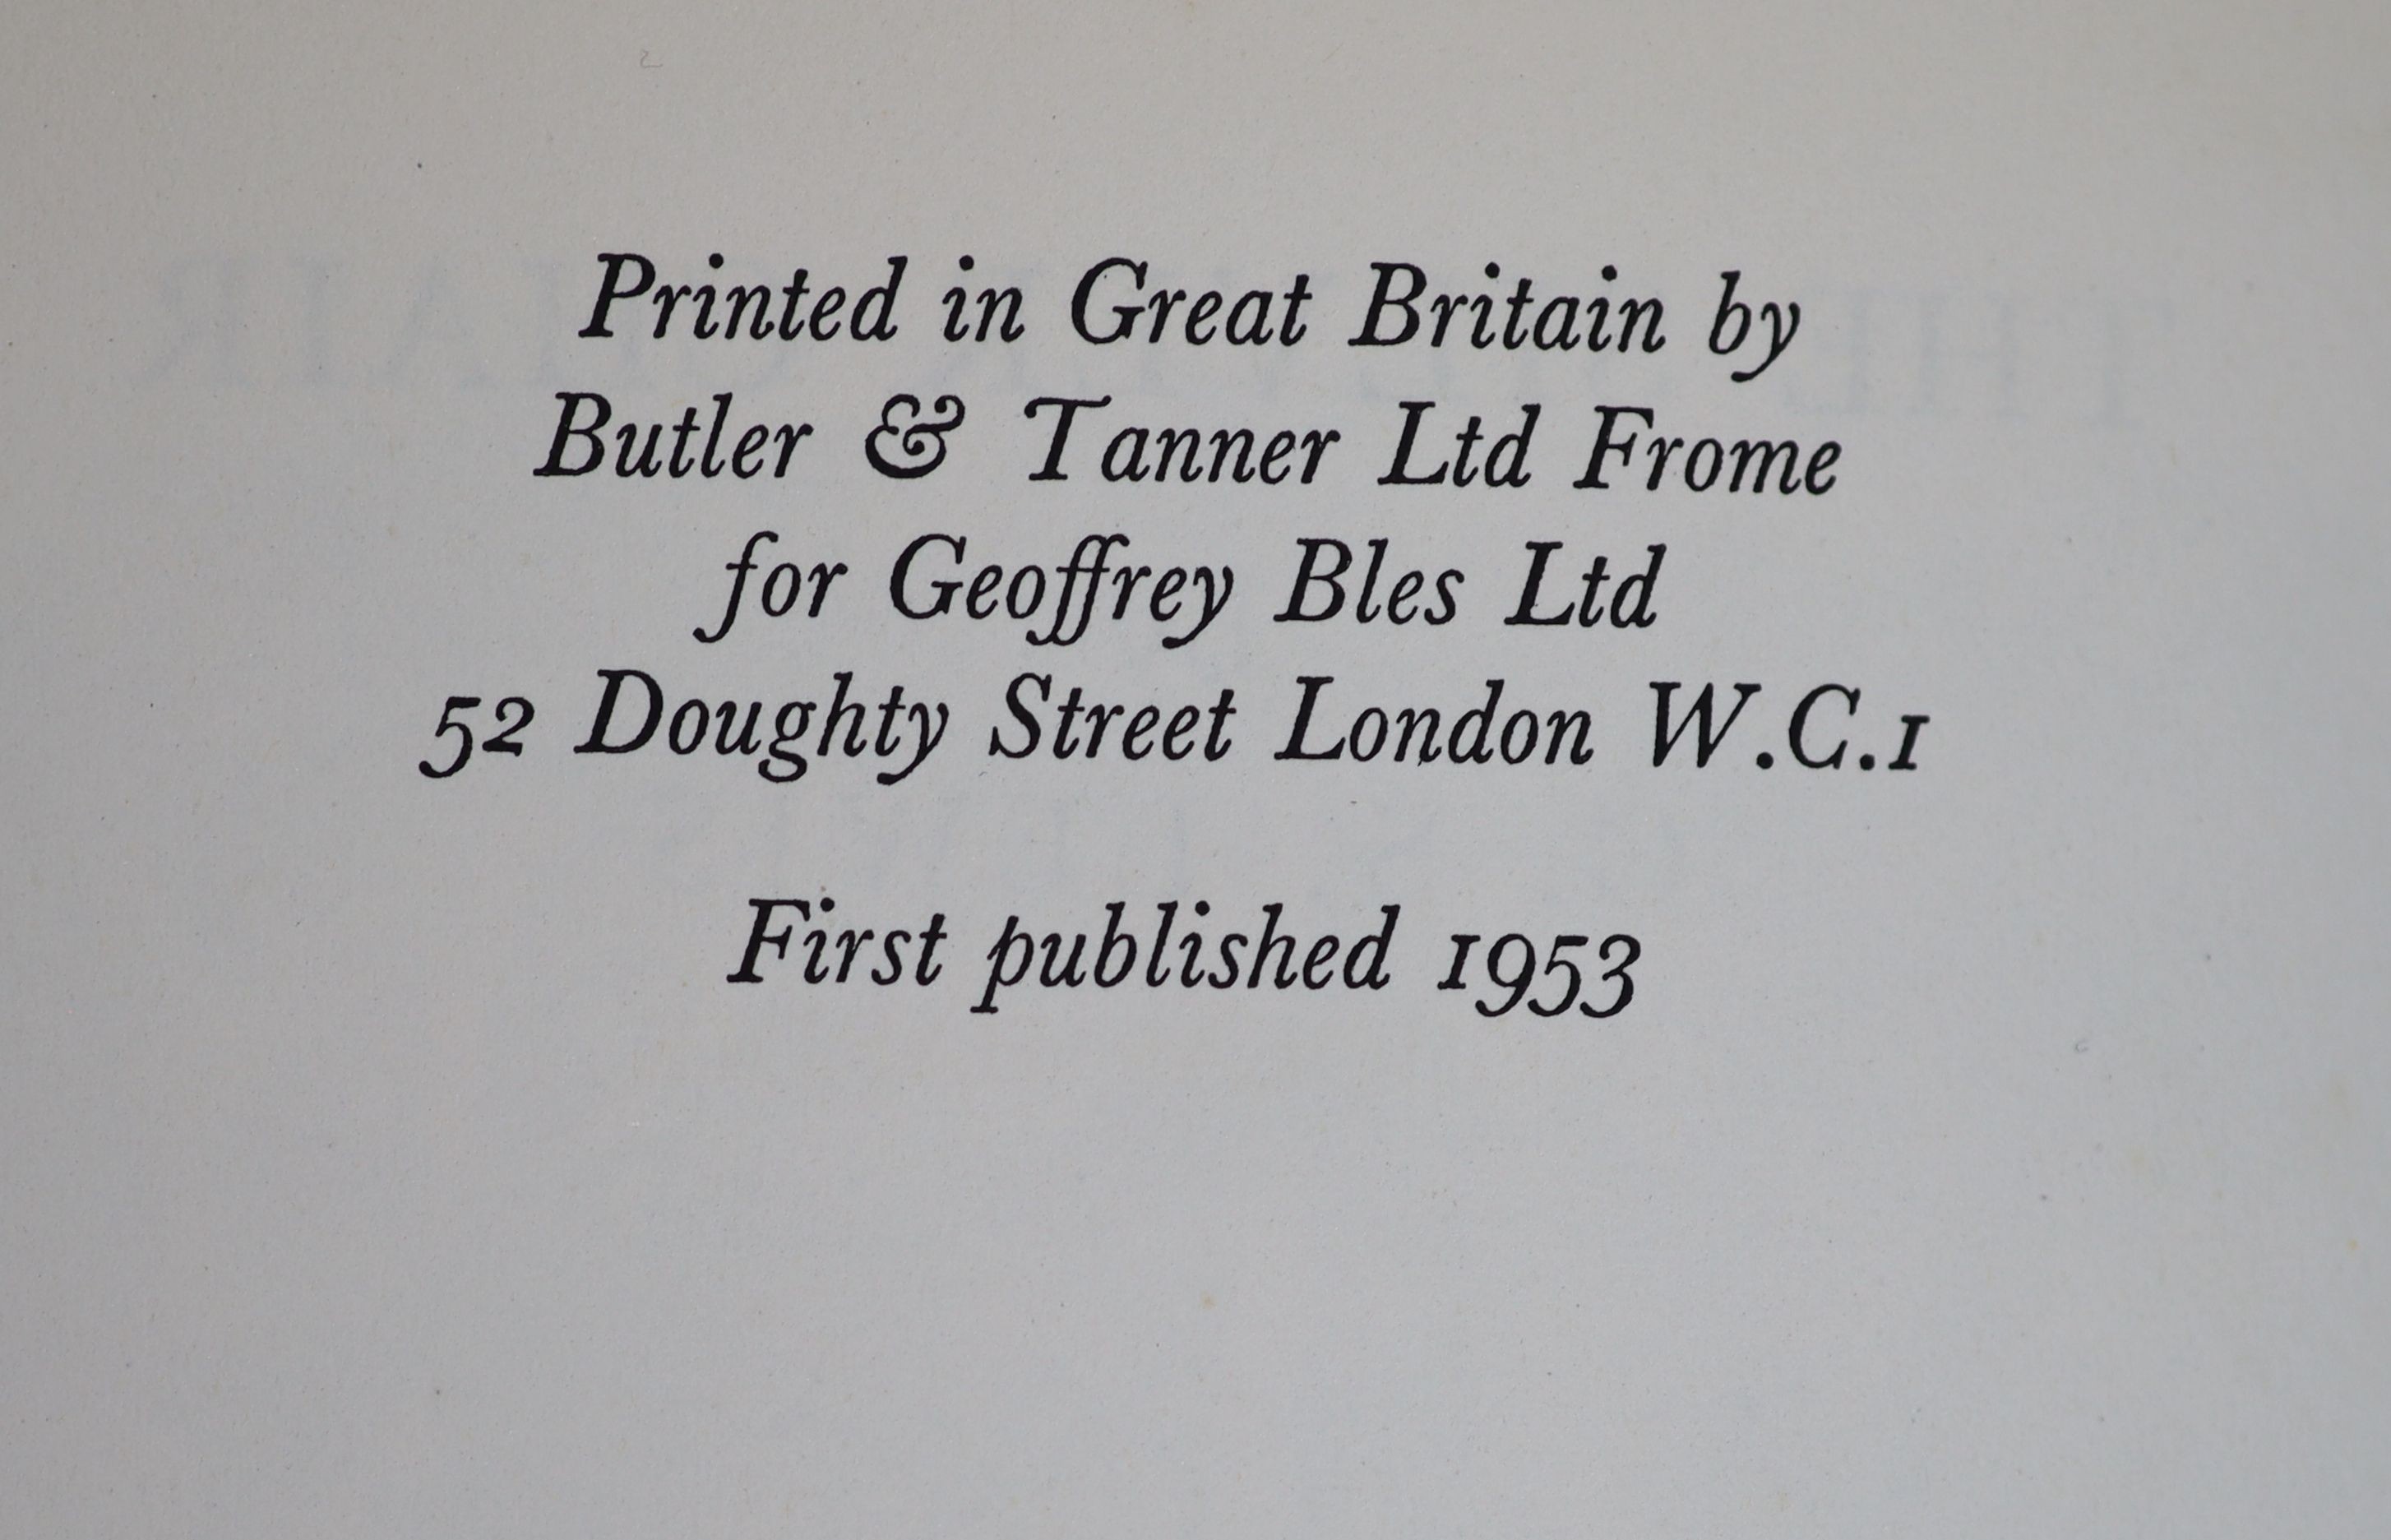 Lewis, Clive Staples - The Silver Chair, 1st edition, 8vo, illustrated by Pauline Baynes, original cloth, in an unclipped d/j, with hole and tear to front flap, Geoffrey Bles, London, 1953